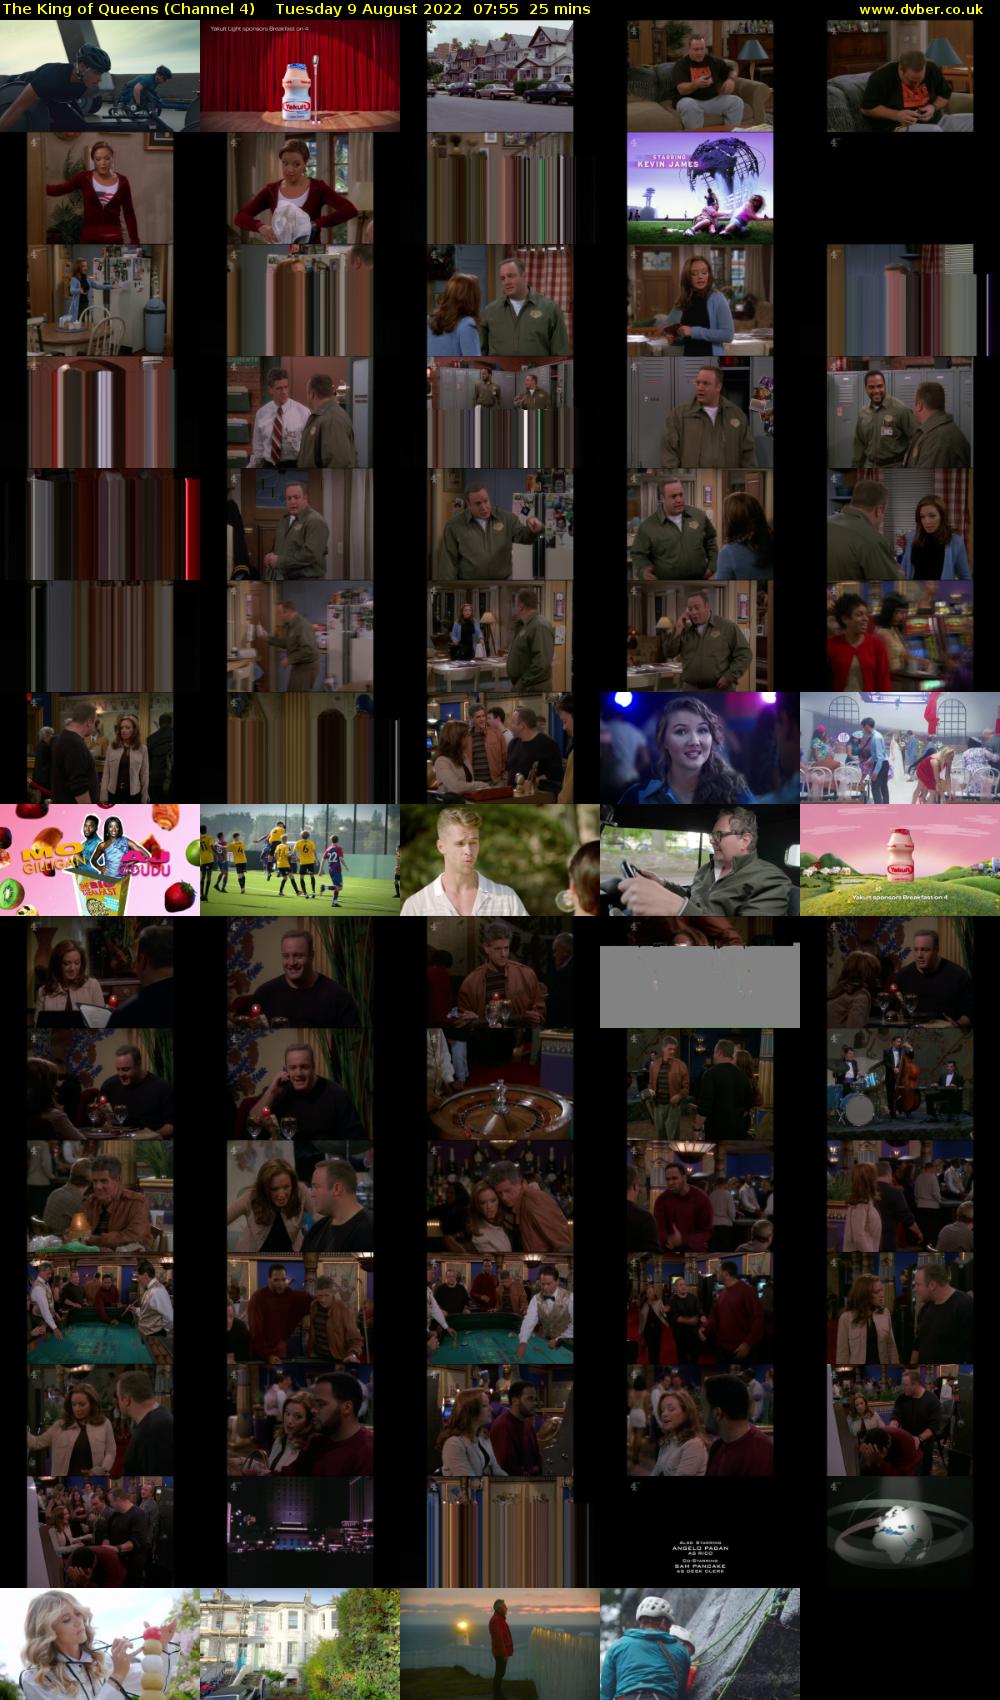 The King of Queens (Channel 4) Tuesday 9 August 2022 07:55 - 08:20